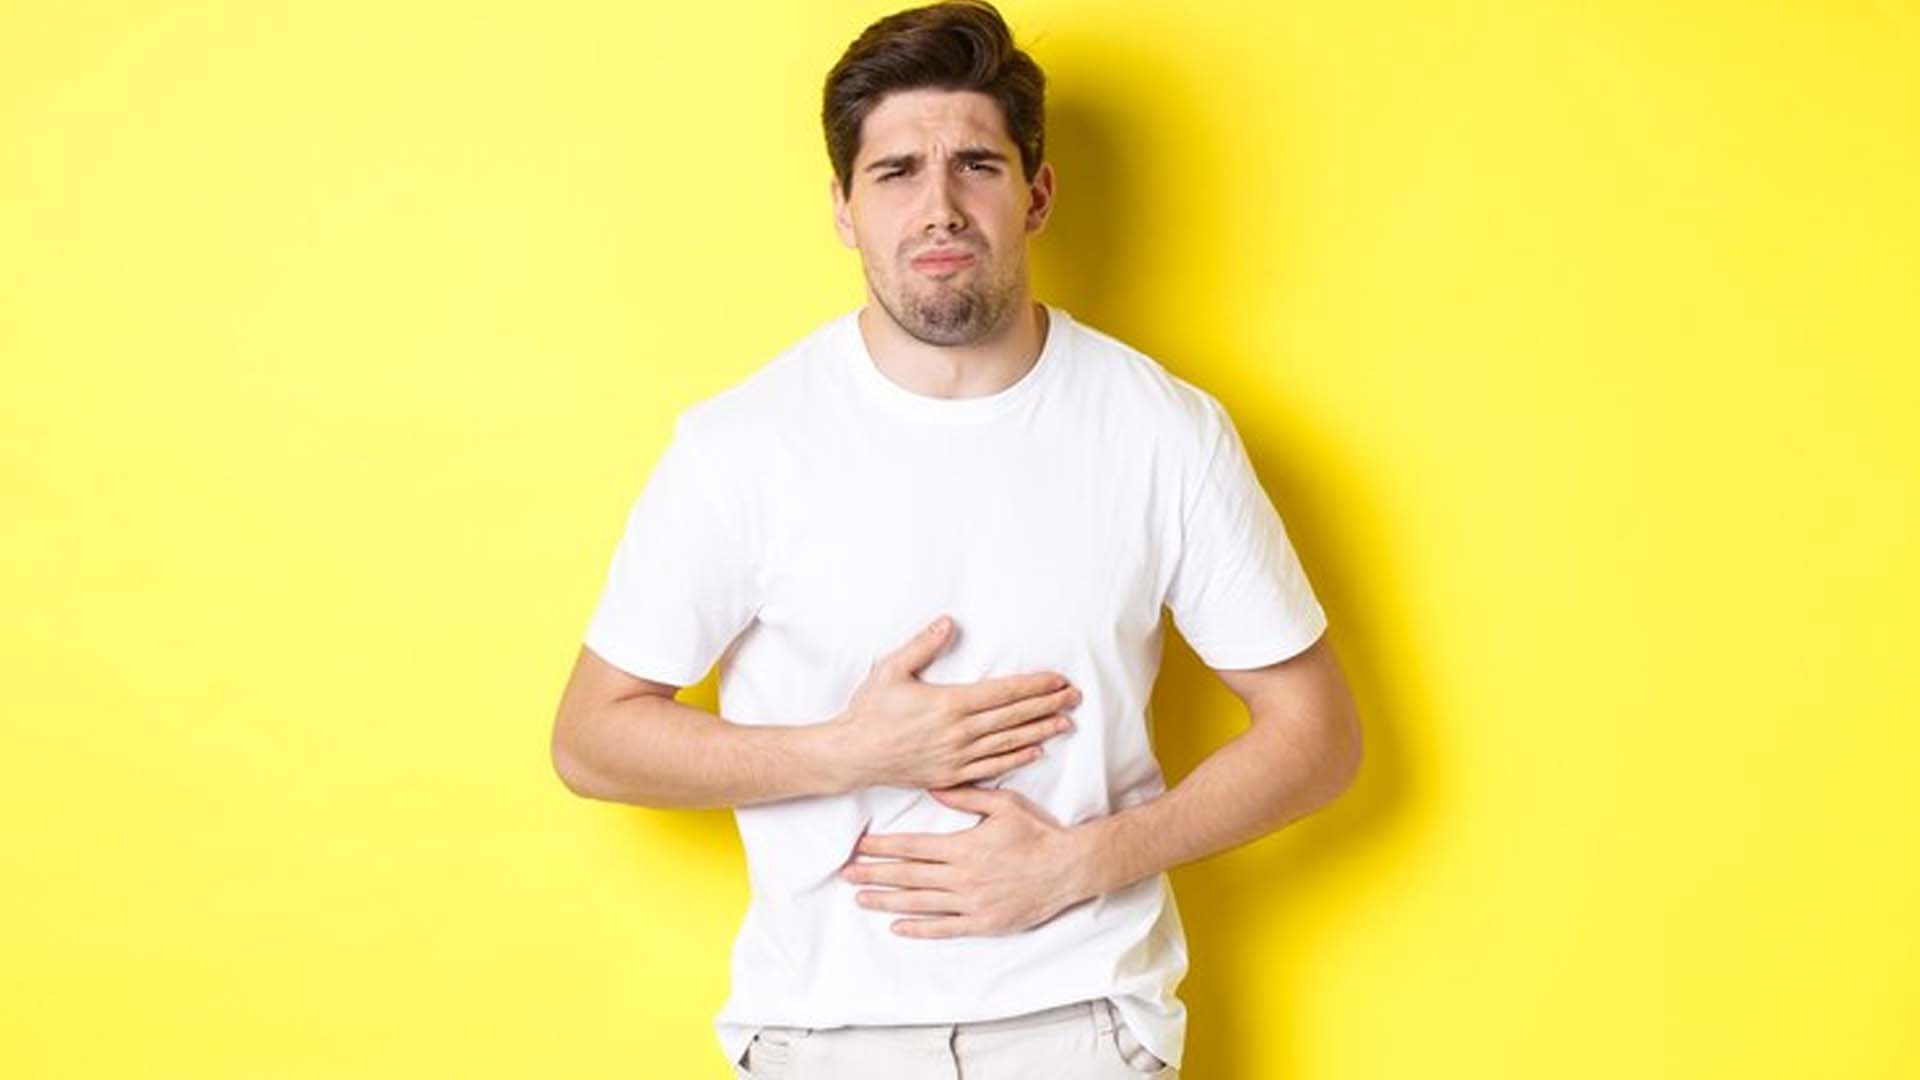 Man Suffering from Indigestion